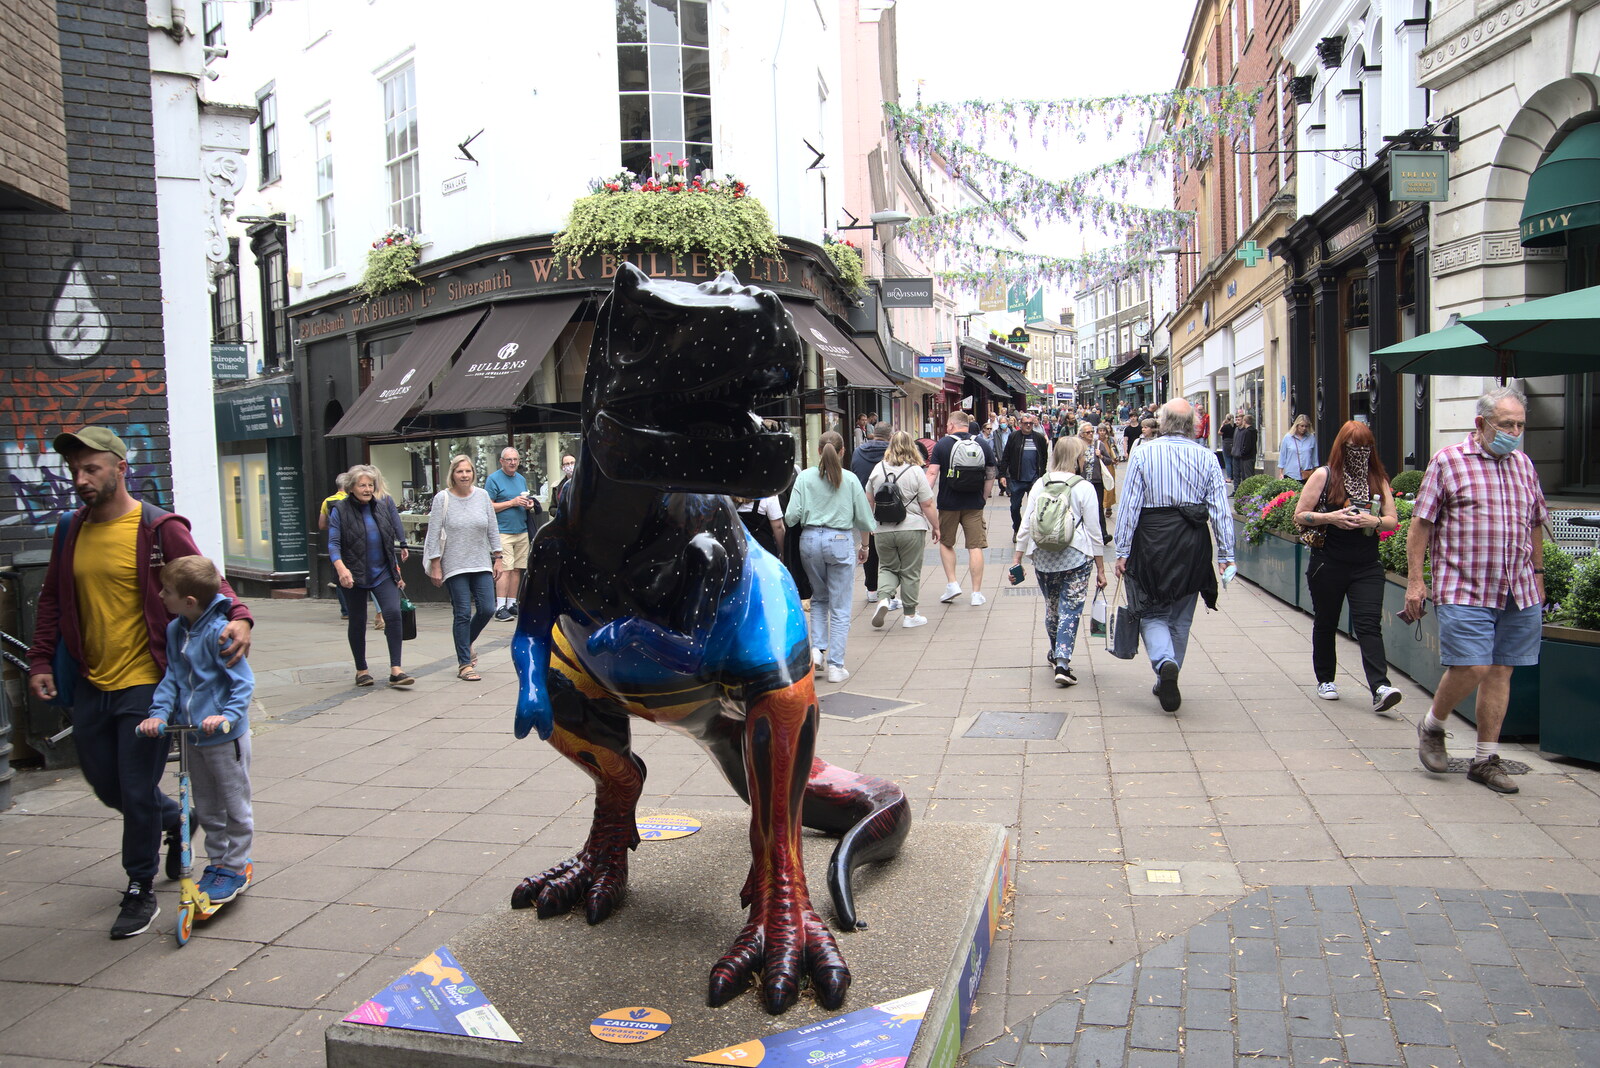 A space dinosaur on London Street from Dippy and the City Dinosaur Trail, Norwich, Norfolk - 19th August 2021